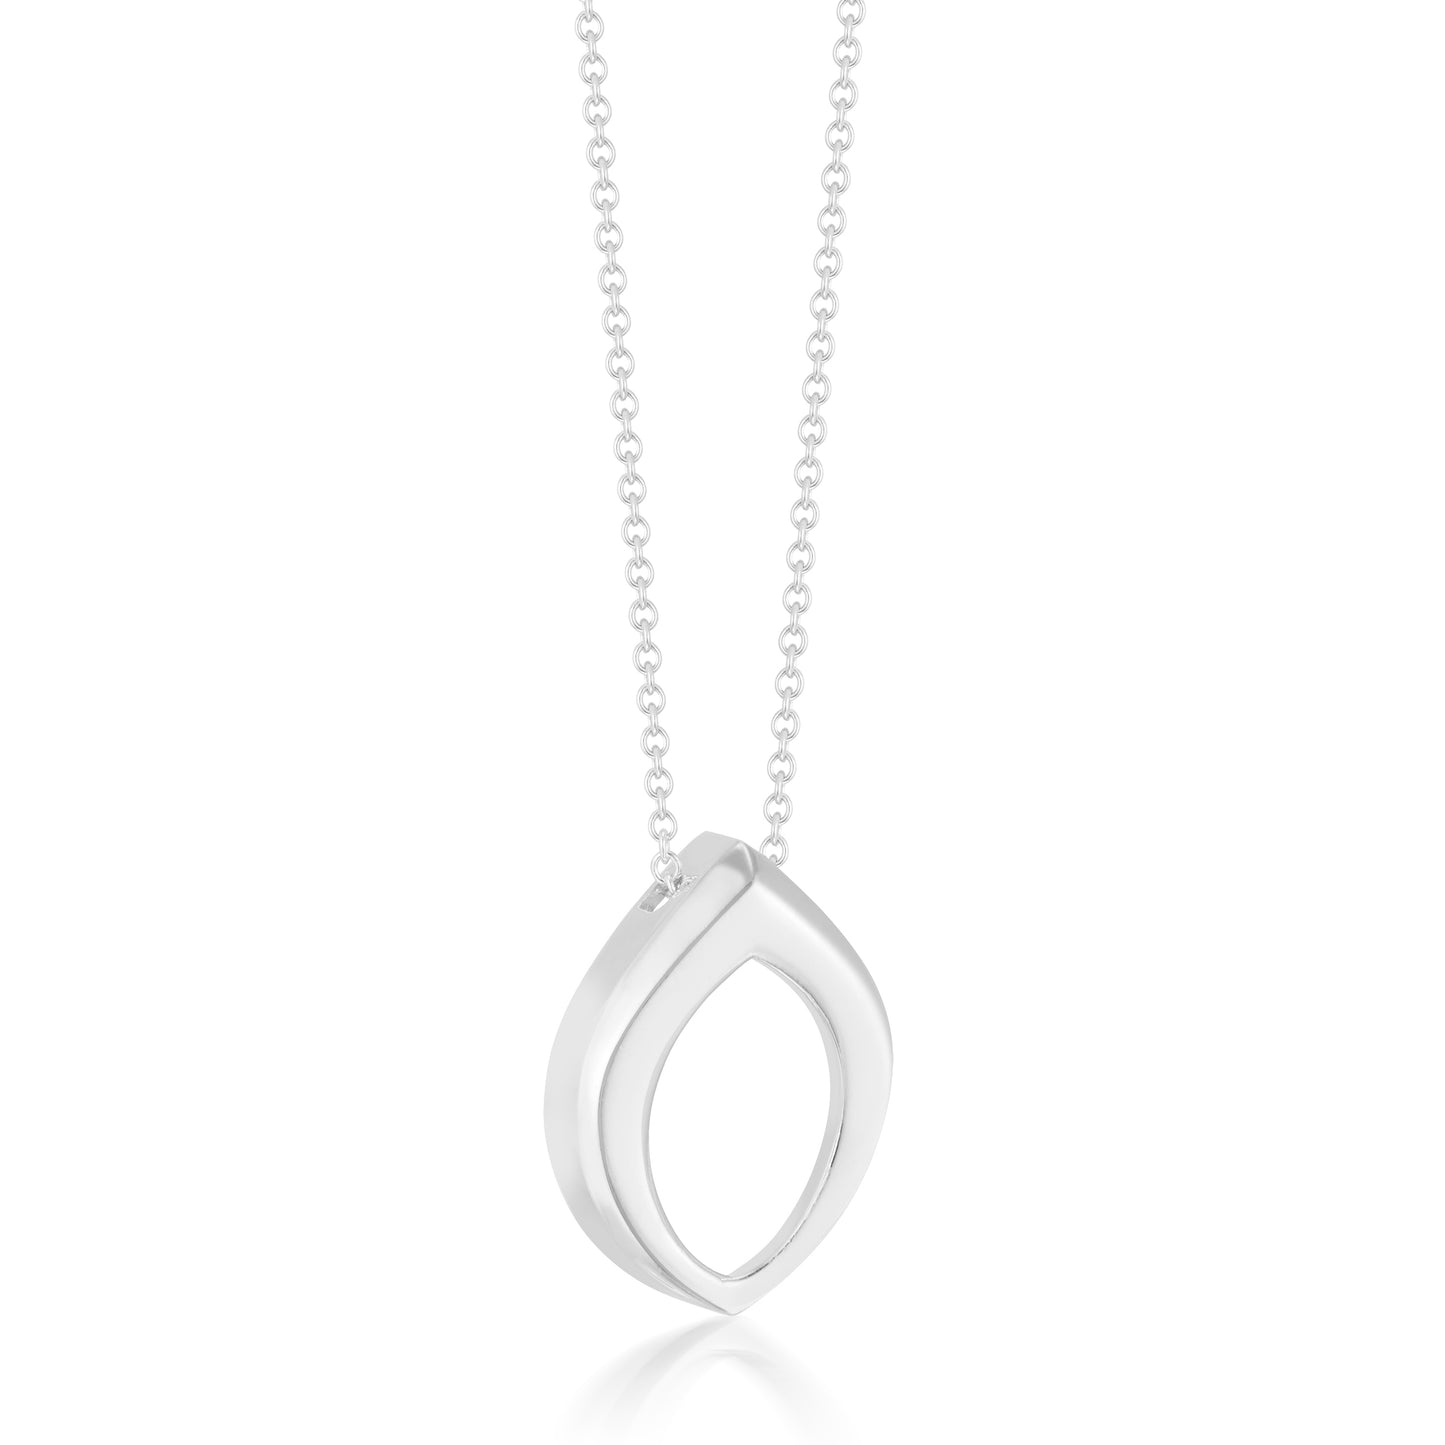 Bud Necklace Large in Sterling Silver